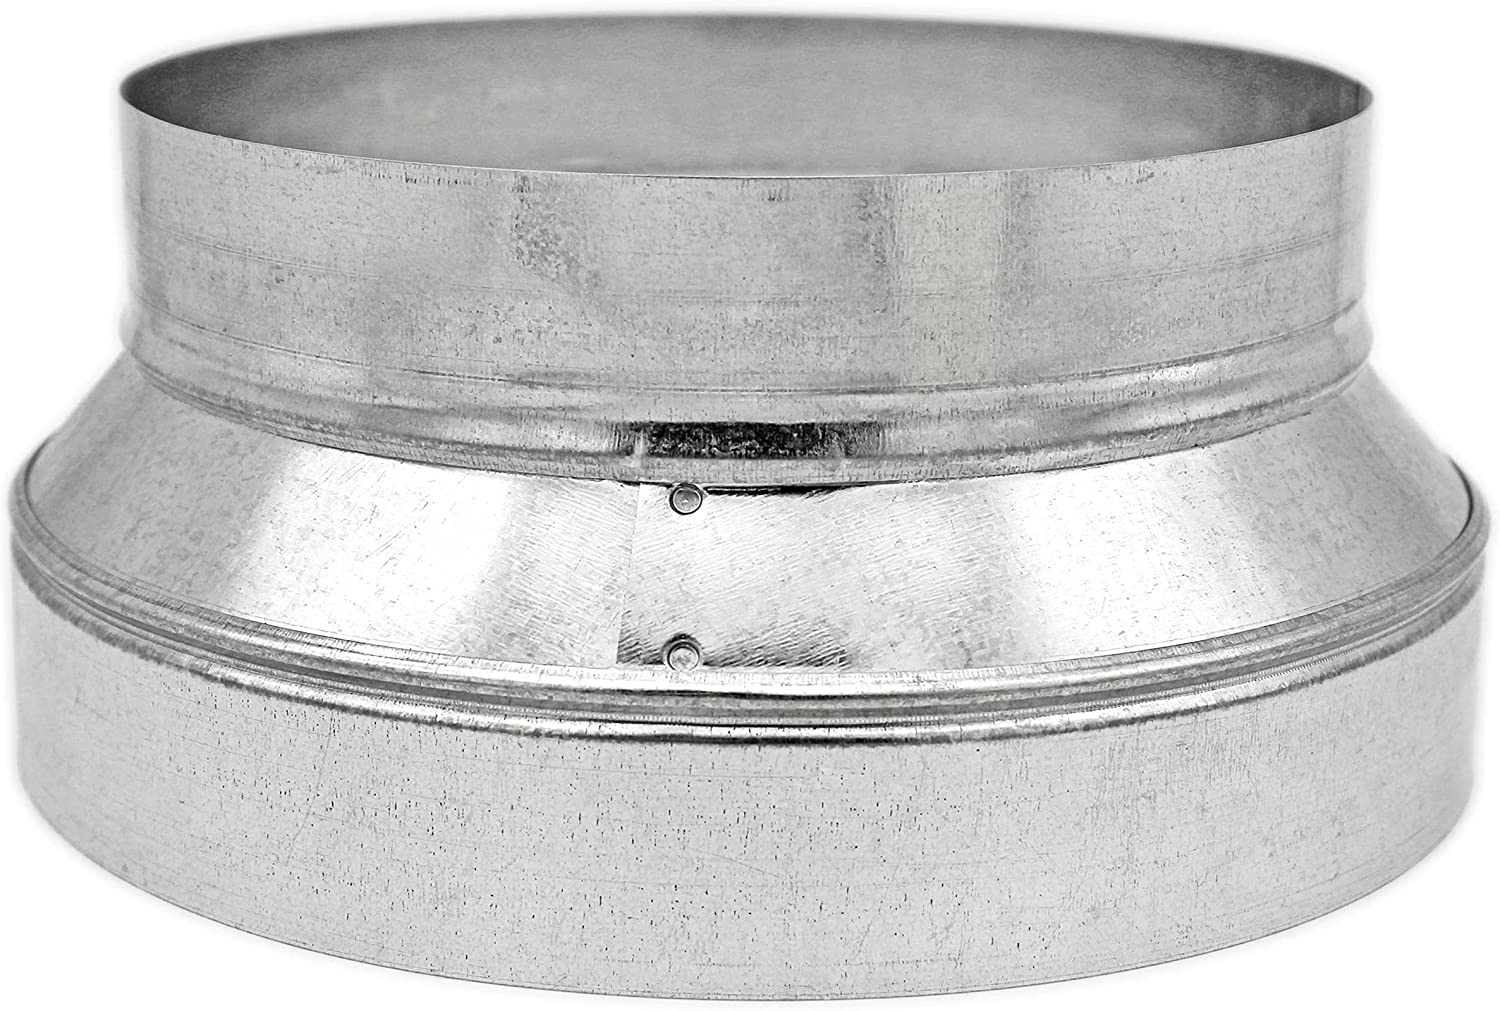 HVAC Premium Round Metal Pipe Reducer & Increaser | 7" to 5" HVAC Duct Reducer or Increaser 30g Gauge | Galvanized Sheet Metal Ducting Connector is Compatible with Duct 5"